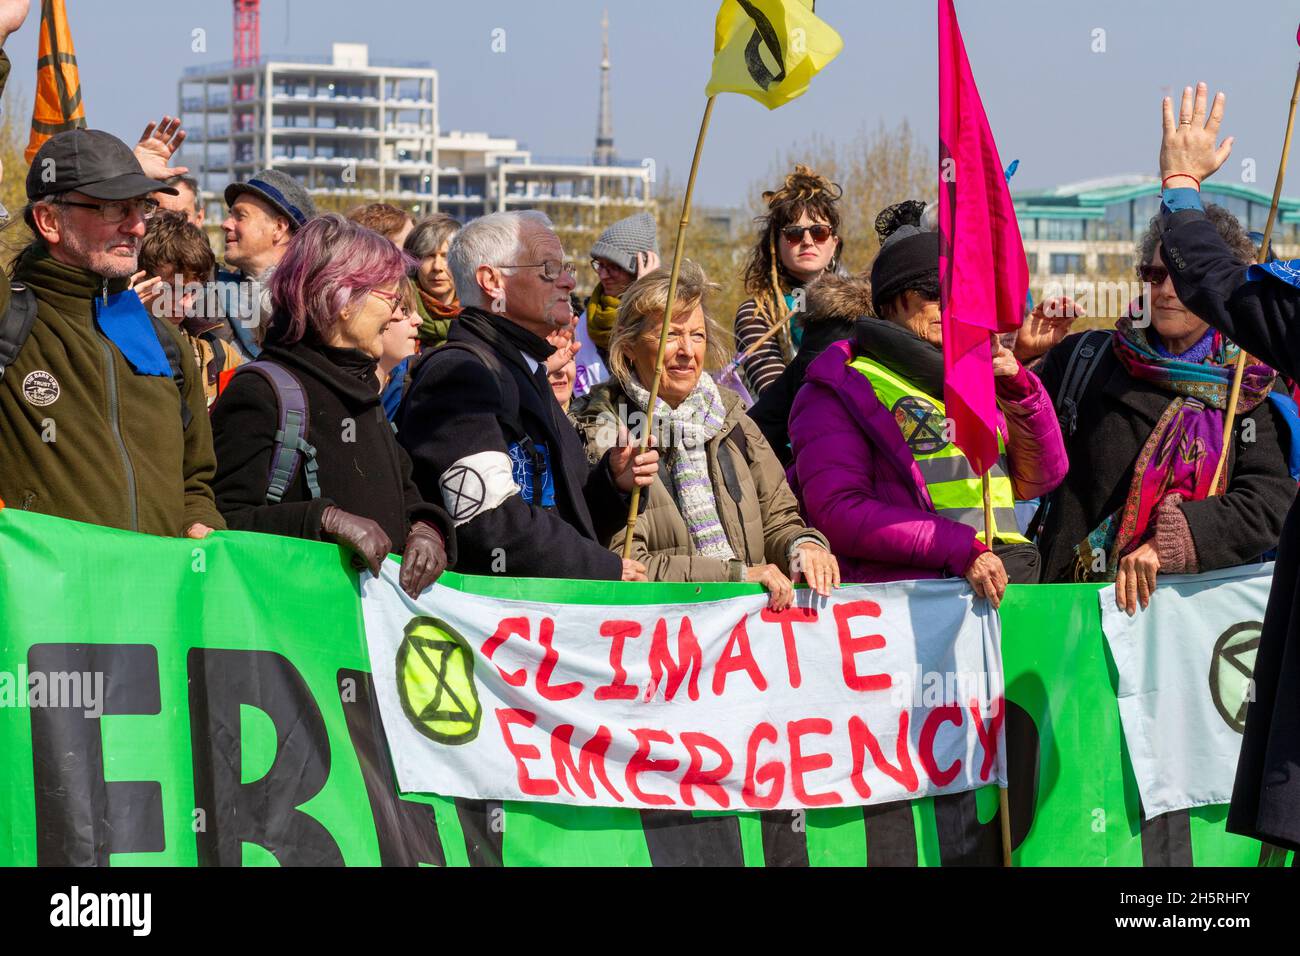 Street photograph of a diverse group of climate change demonstrators holding a large green banner with flags and placards.  Range of age groups. Stock Photo